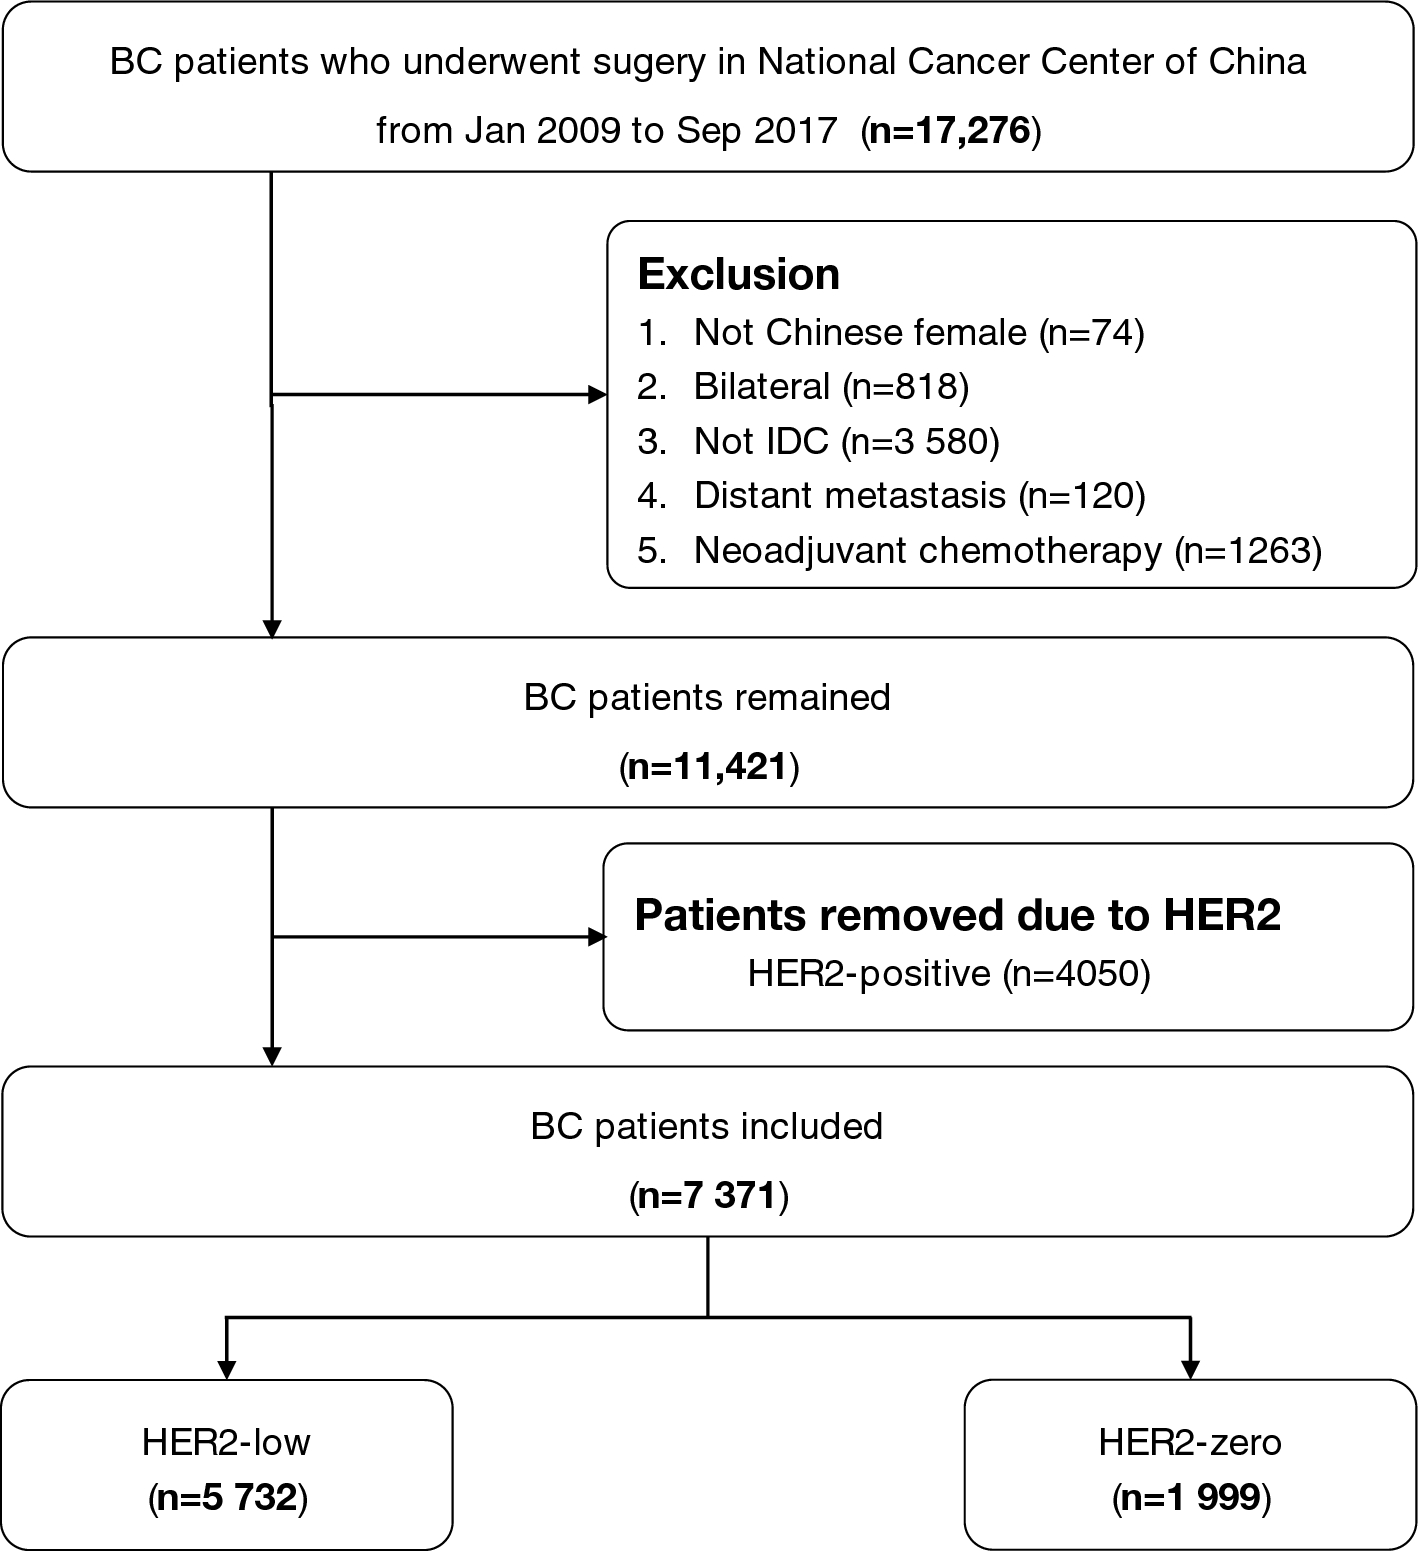 Prognostic Impact of HER2-Low and HER2-Zero in Resectable Breast Cancer with Different Hormone Receptor Status: A Landmark Analysis of Real-World Data from the National Cancer Center of China